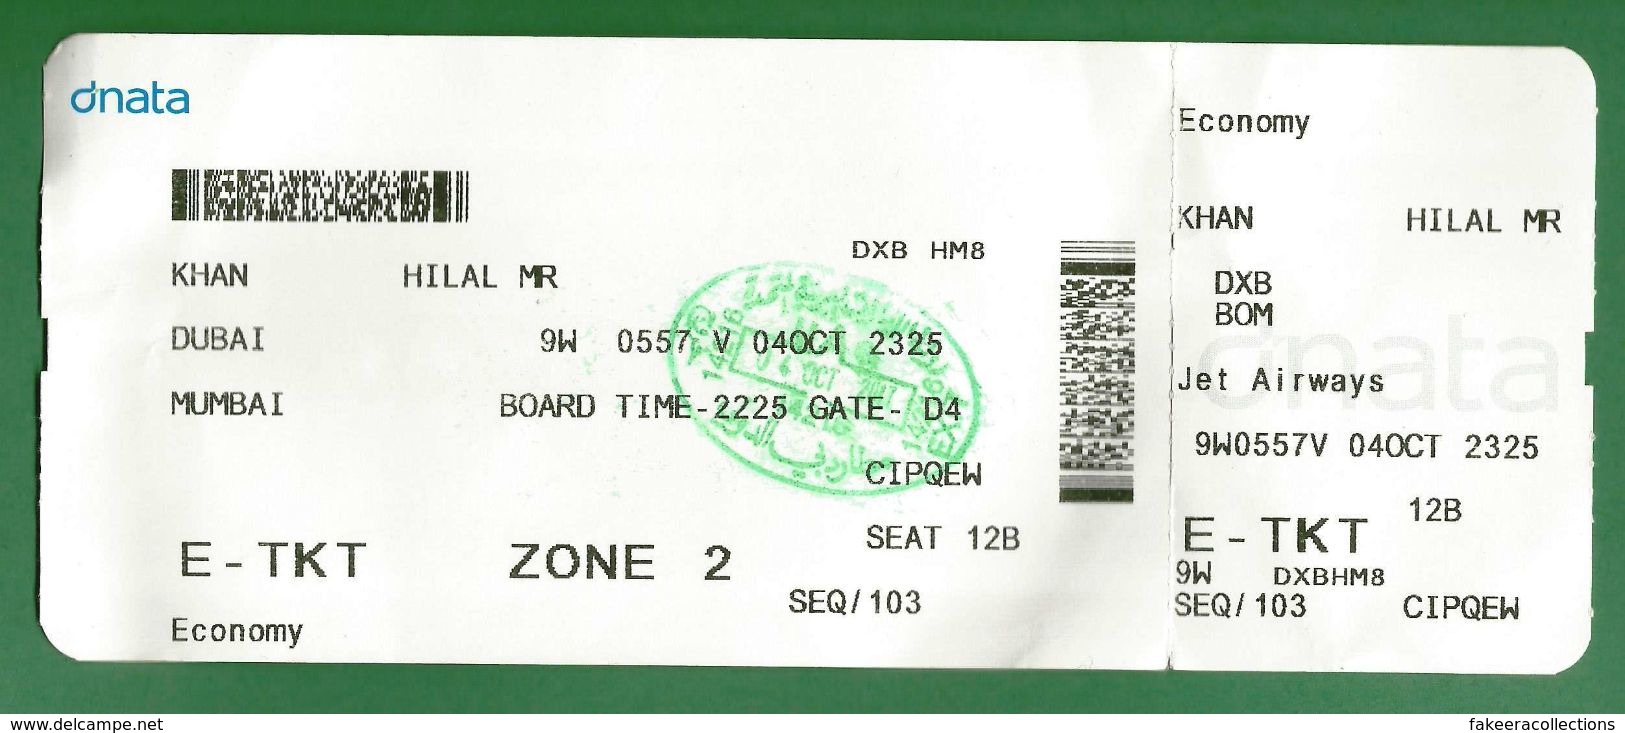 DUBAI, UAE To MUMBAI, INDIA - Boarding Card / Pass For JET AIRWAYS Issued By DNATA - Travel Ticket, Immigration Seal ... - Welt